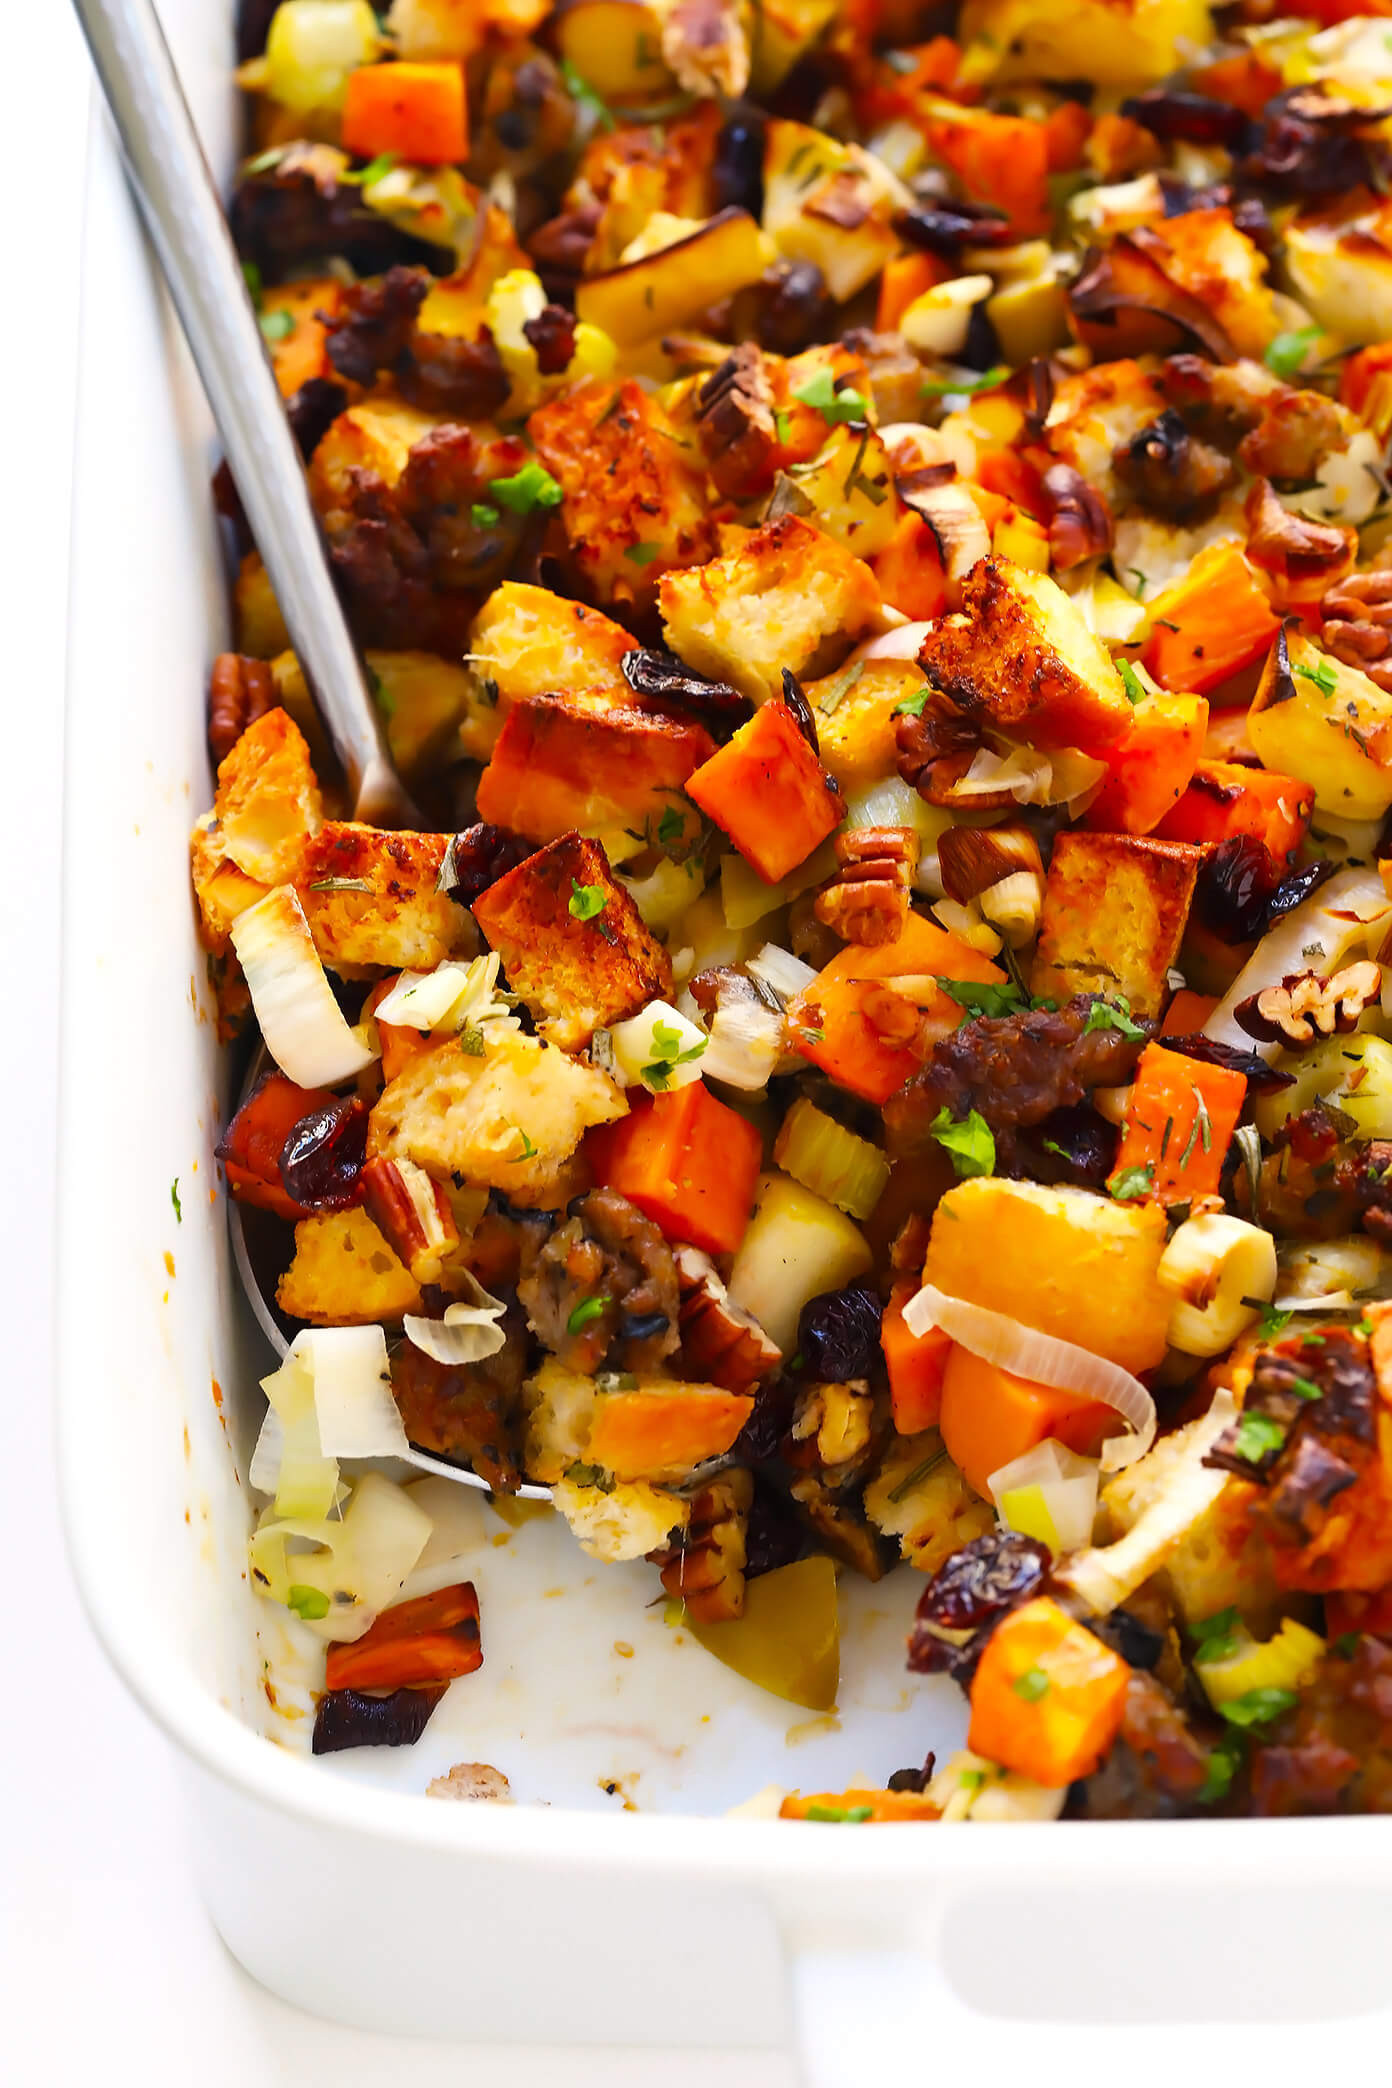 Sweet Potato Recipe For Thanksgiving
 The BEST Sausage and Sweet Potato Thanksgiving Stuffing